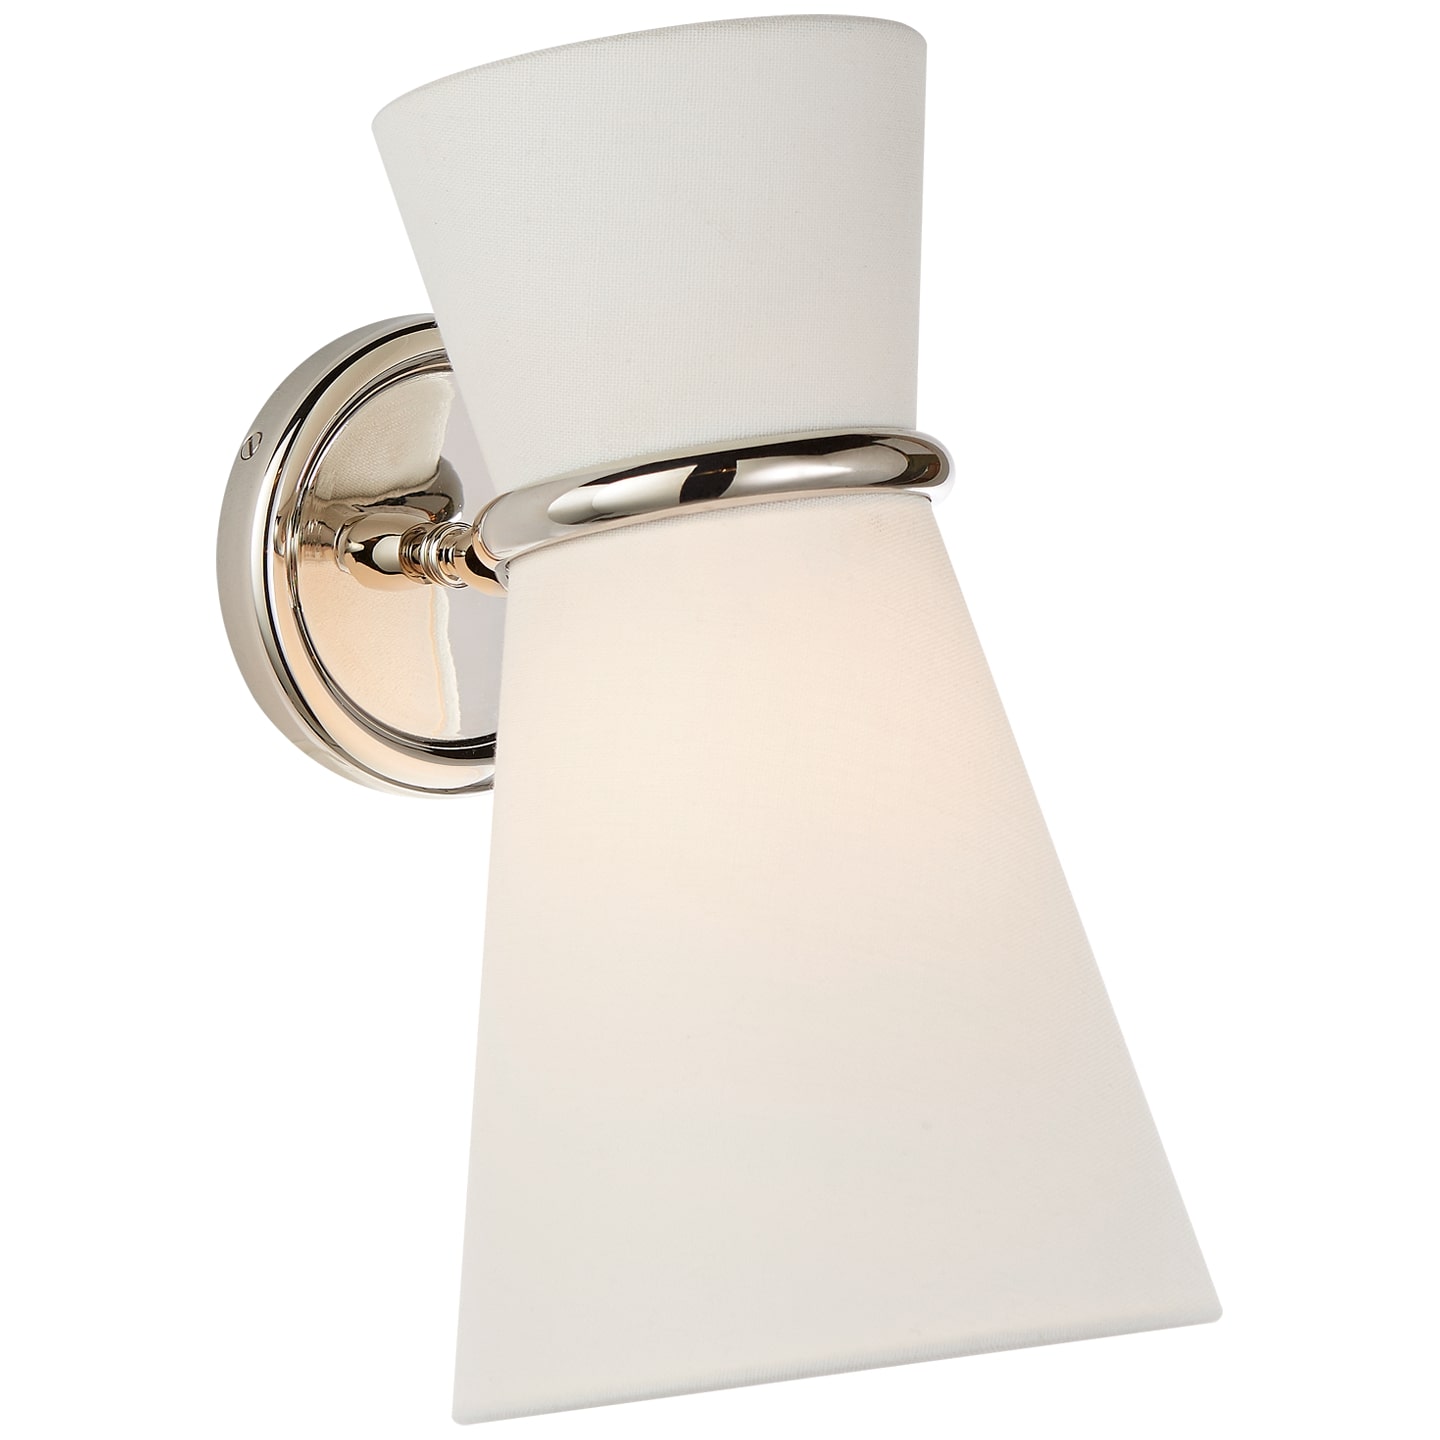 Clarkson Small Single Pivoting Sconce